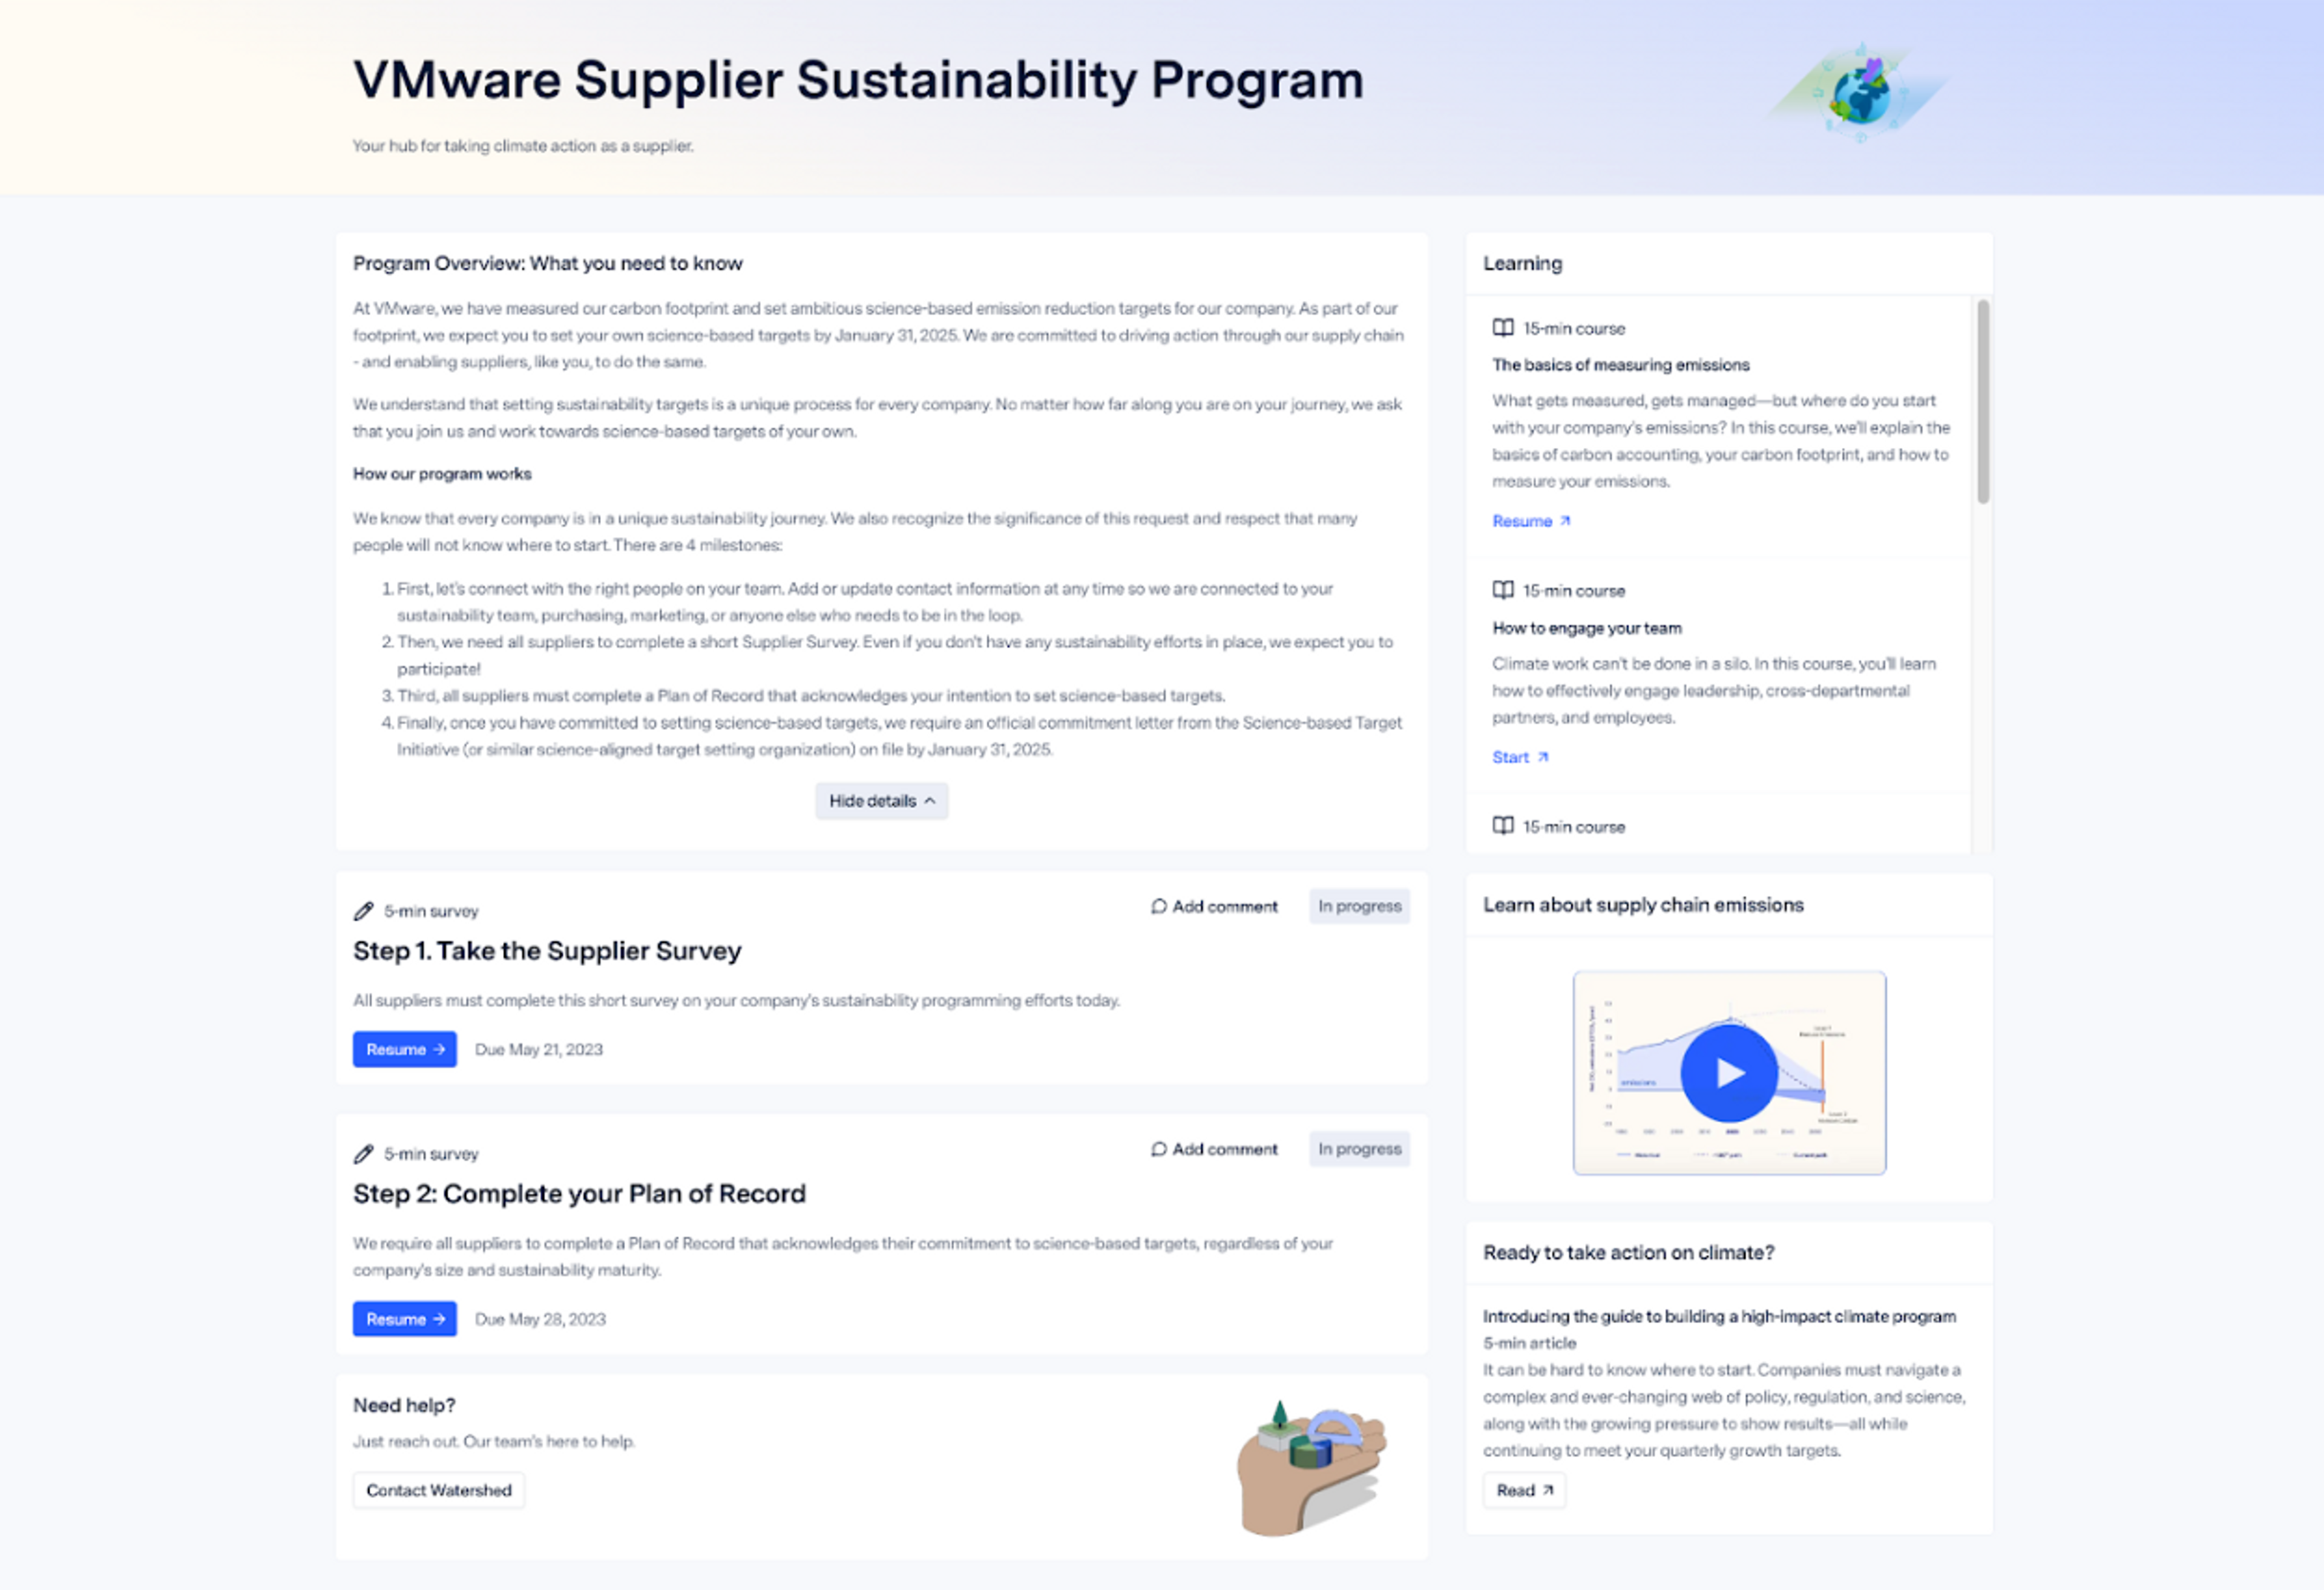 VMware supplier portal, hosted by Watershed